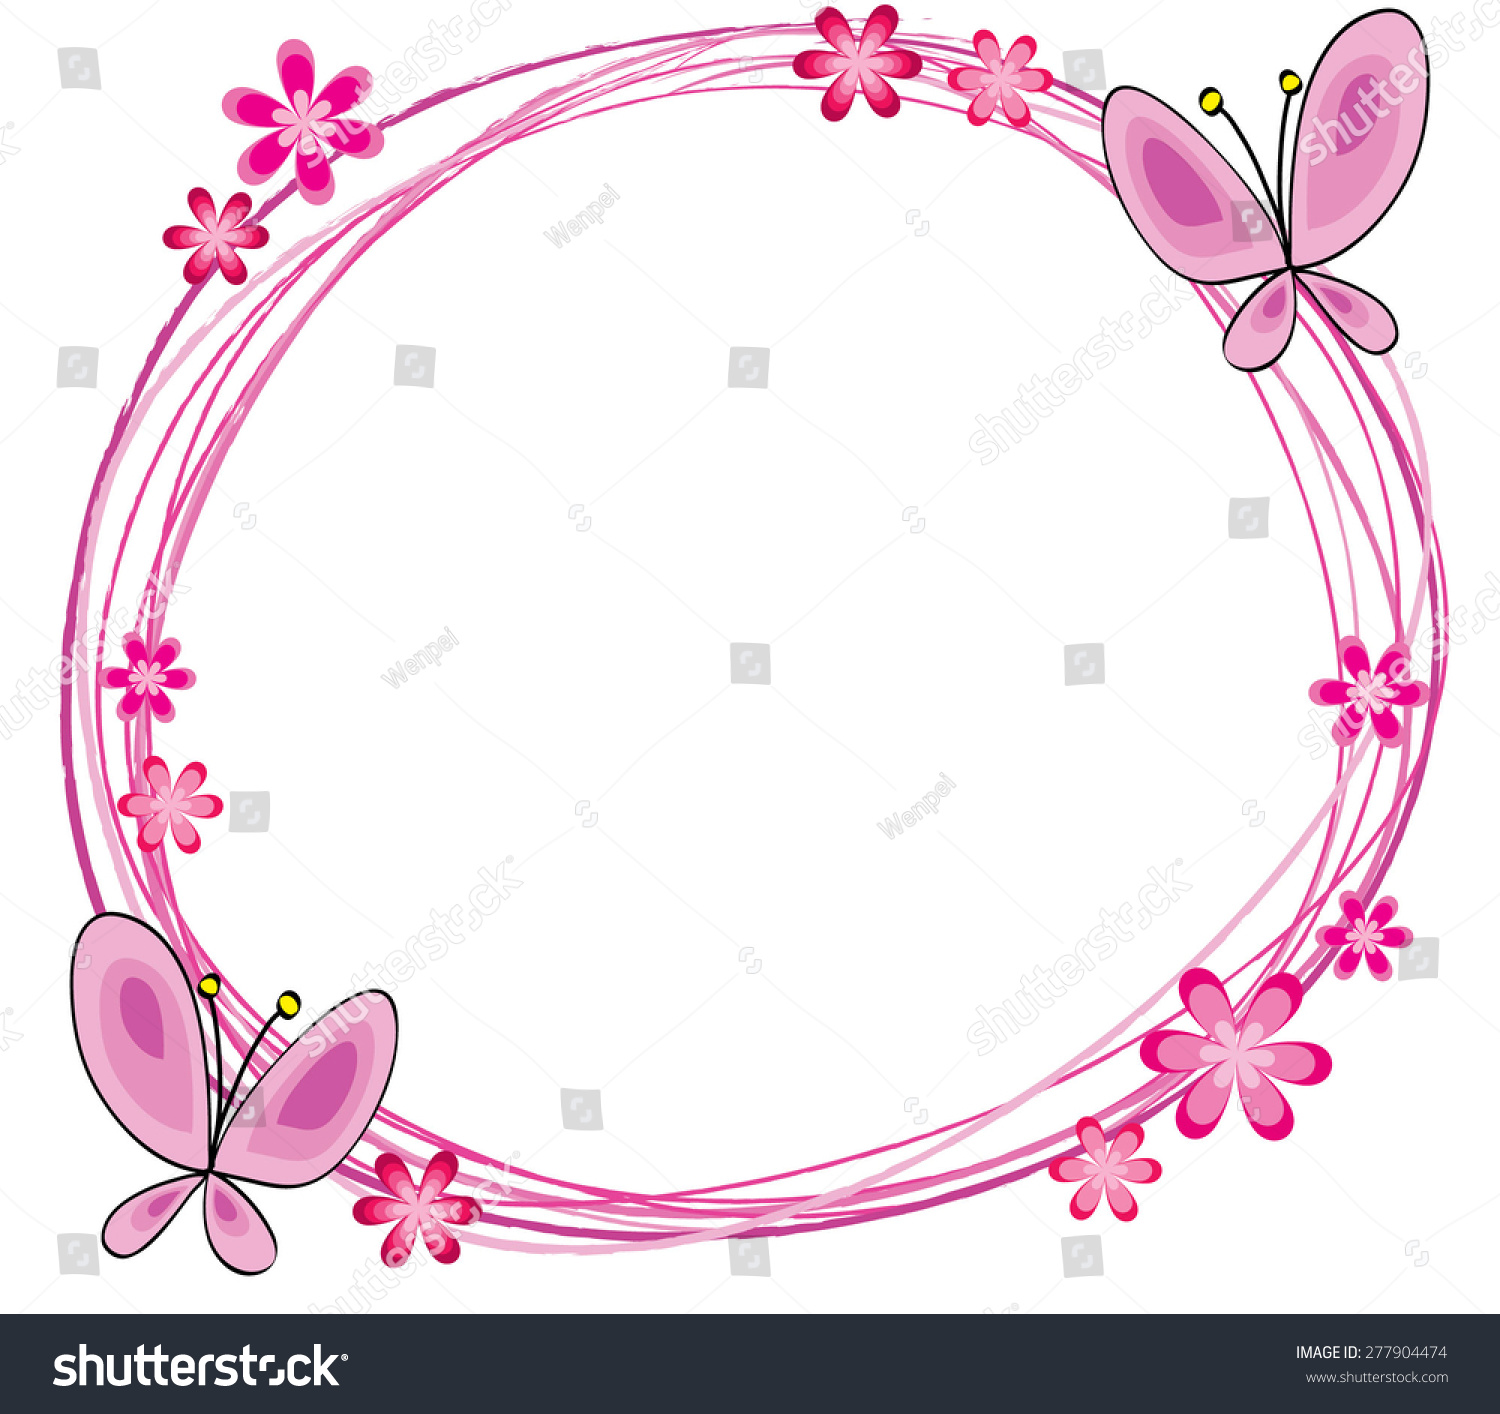 Download Flowers Butterfly Circle Border Stock Vector (Royalty Free ...